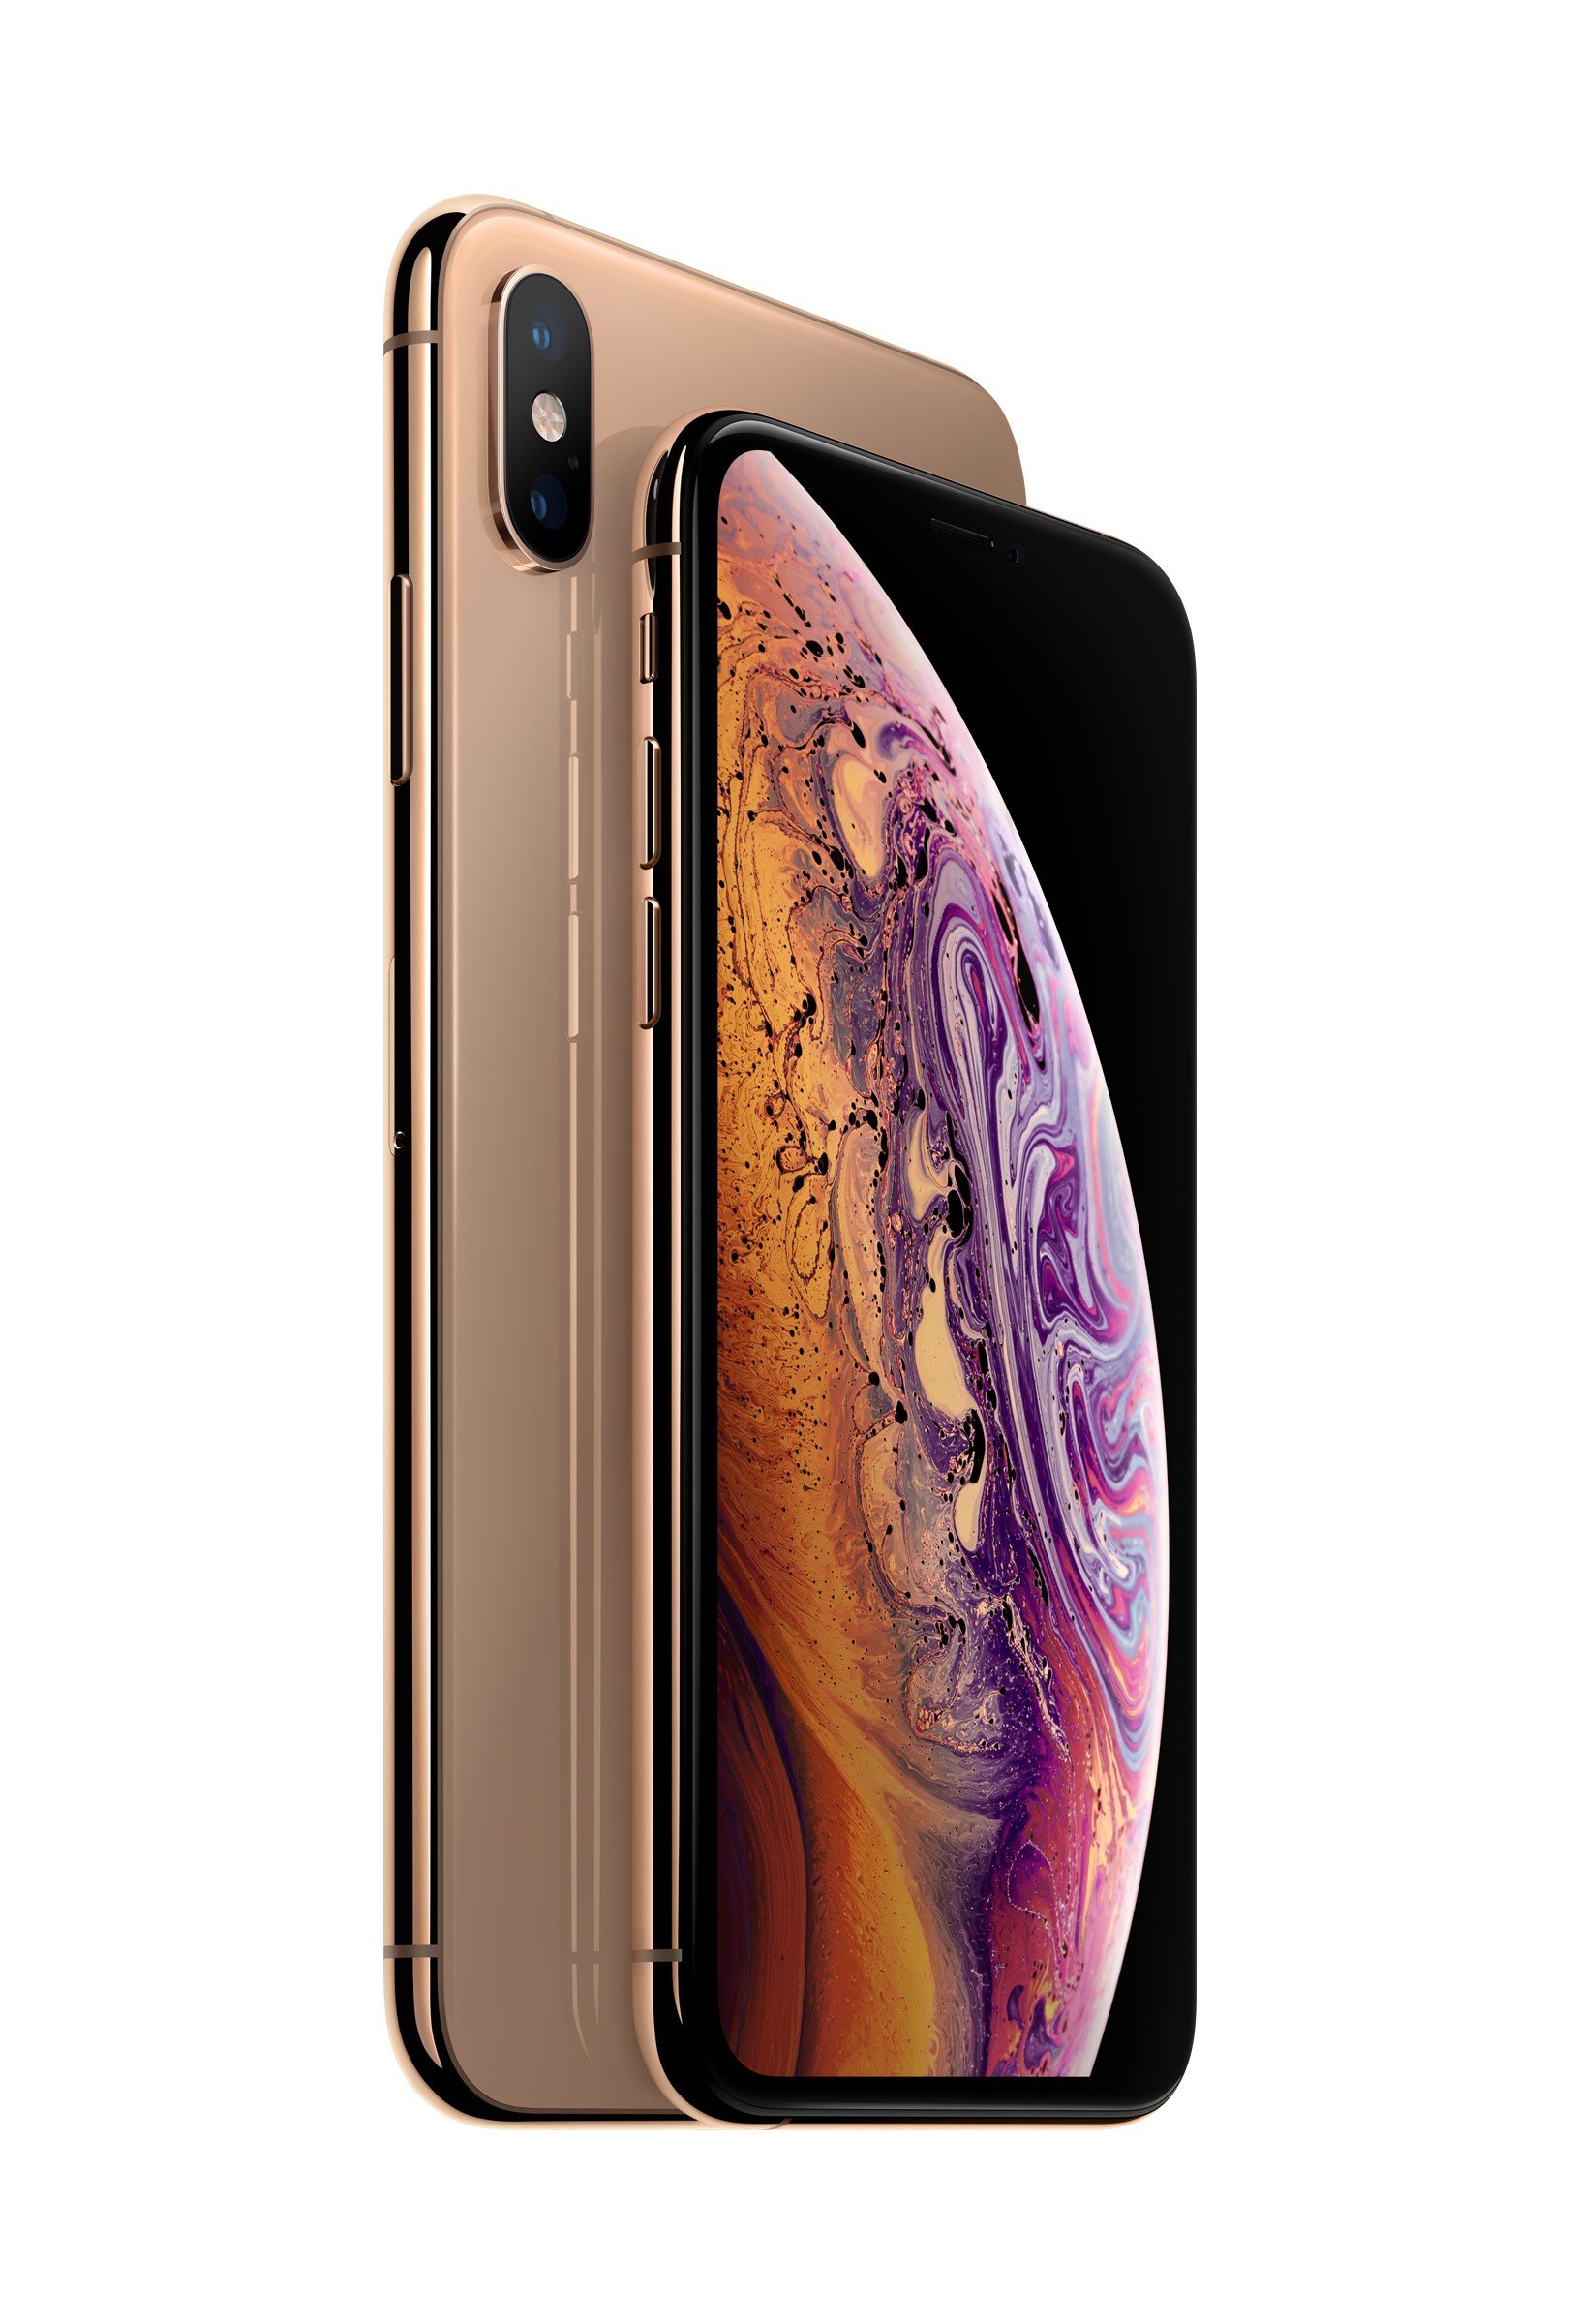 Apple Announces iPhone Xs and Xs Max